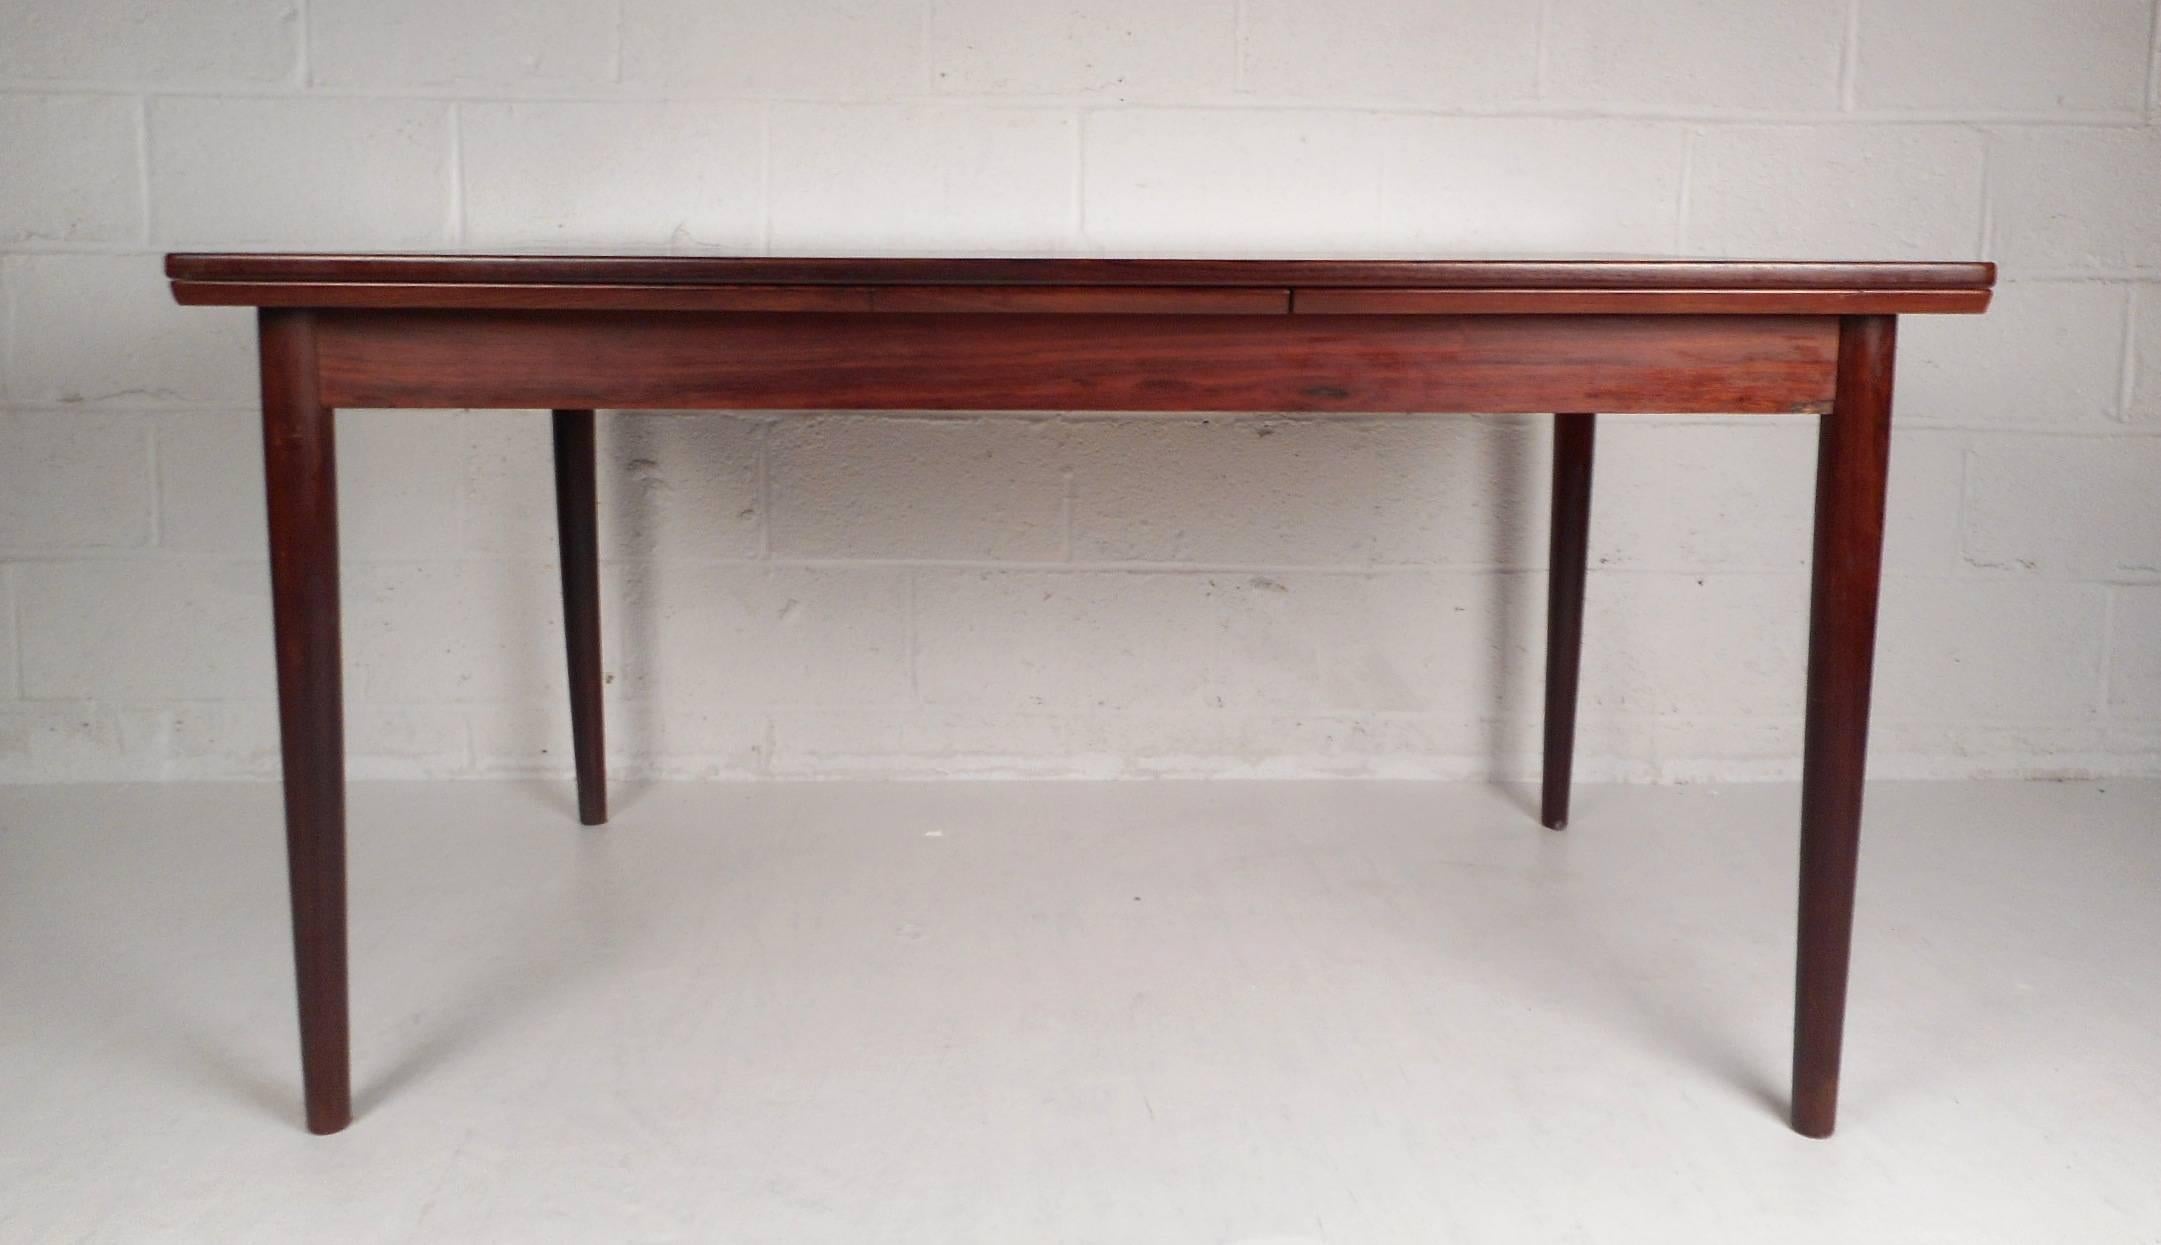 This beautiful vintage modern dining table features the ability to extend all the way to 97.5 inches wide from the original width of 55 inches. Elegant rosewood wood grain throughout and tapered legs add to the allure. Sleek design with hidden